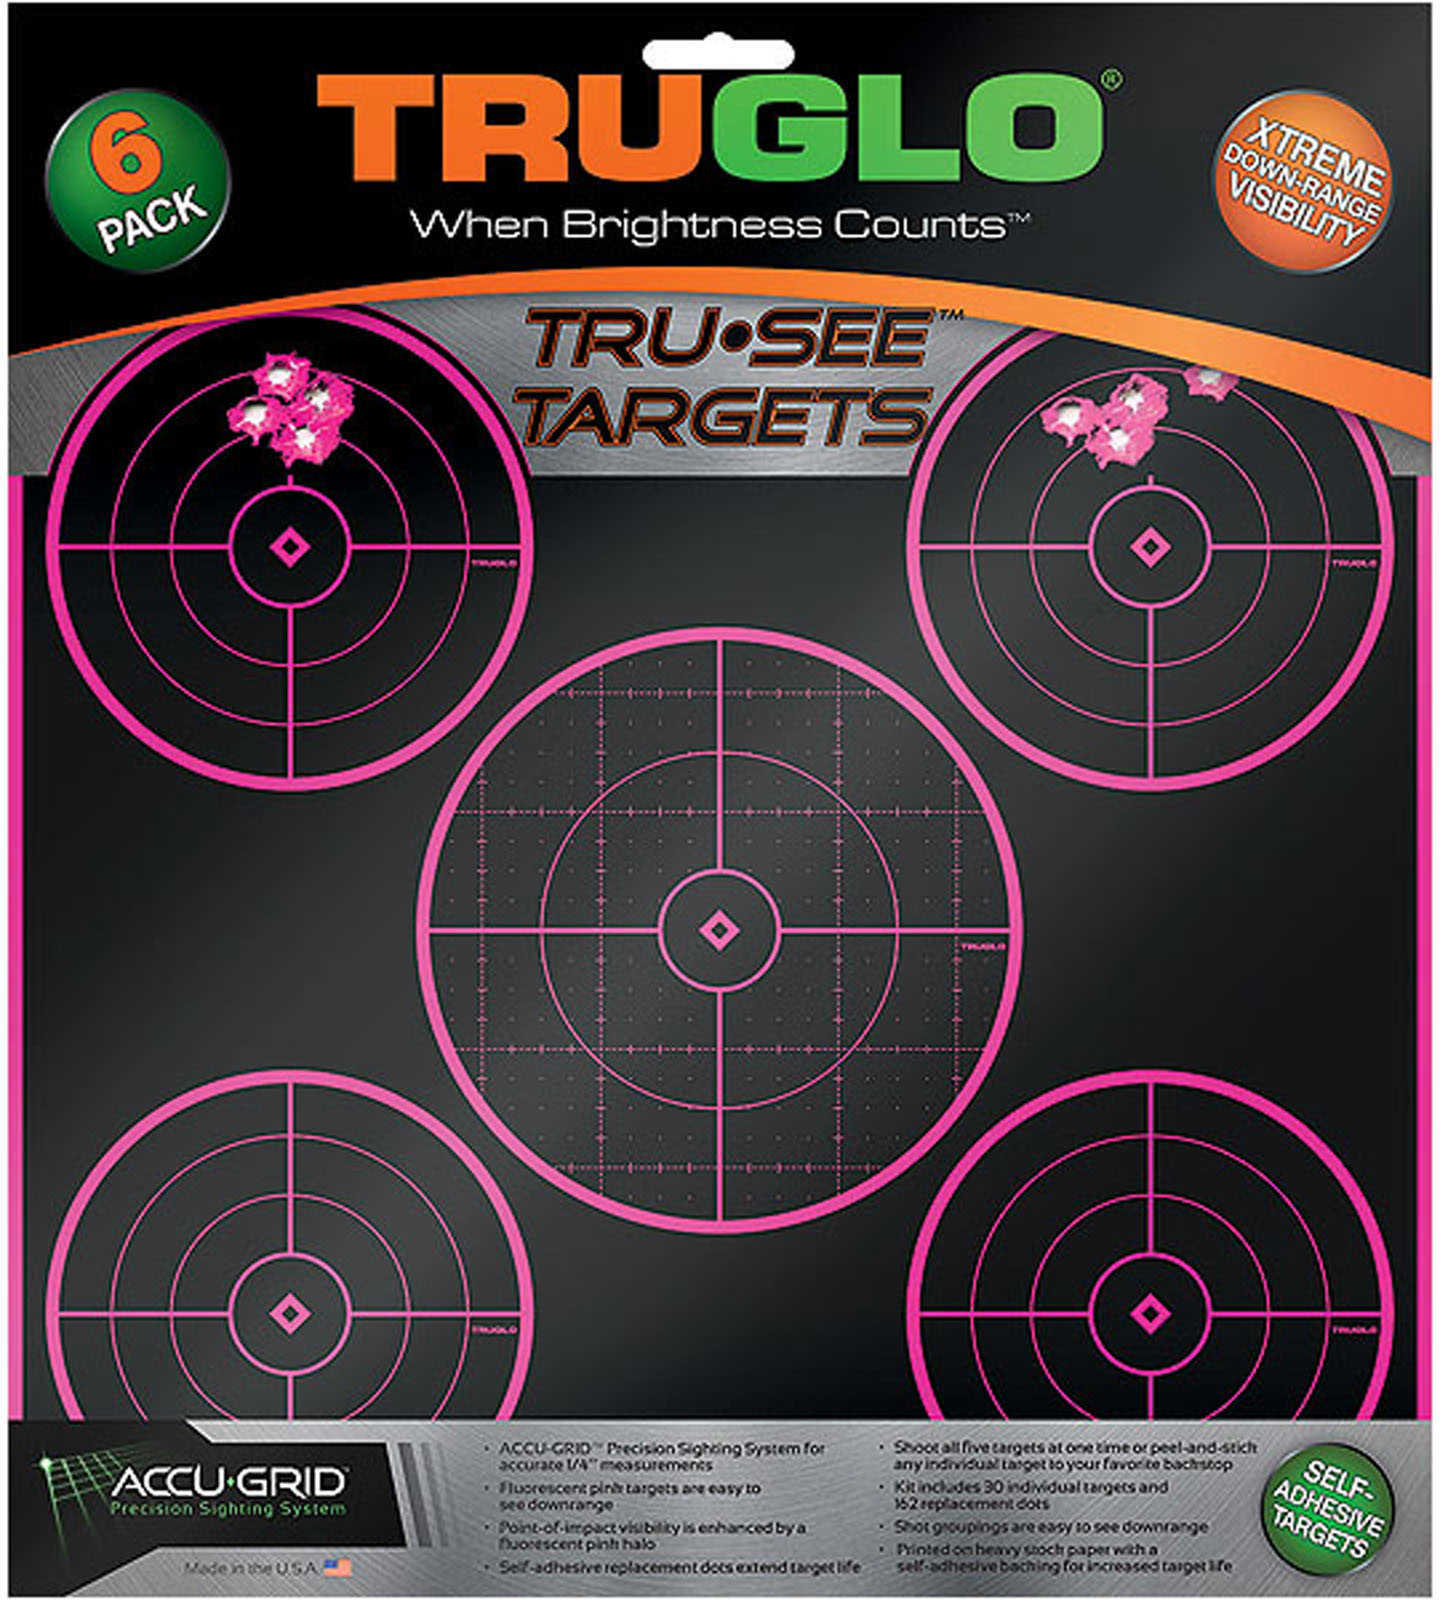 Truglo TG11P6 Tru-See Self-Adhesive Paper 12" x 12" Silhouette Black/Pink 6 Pack